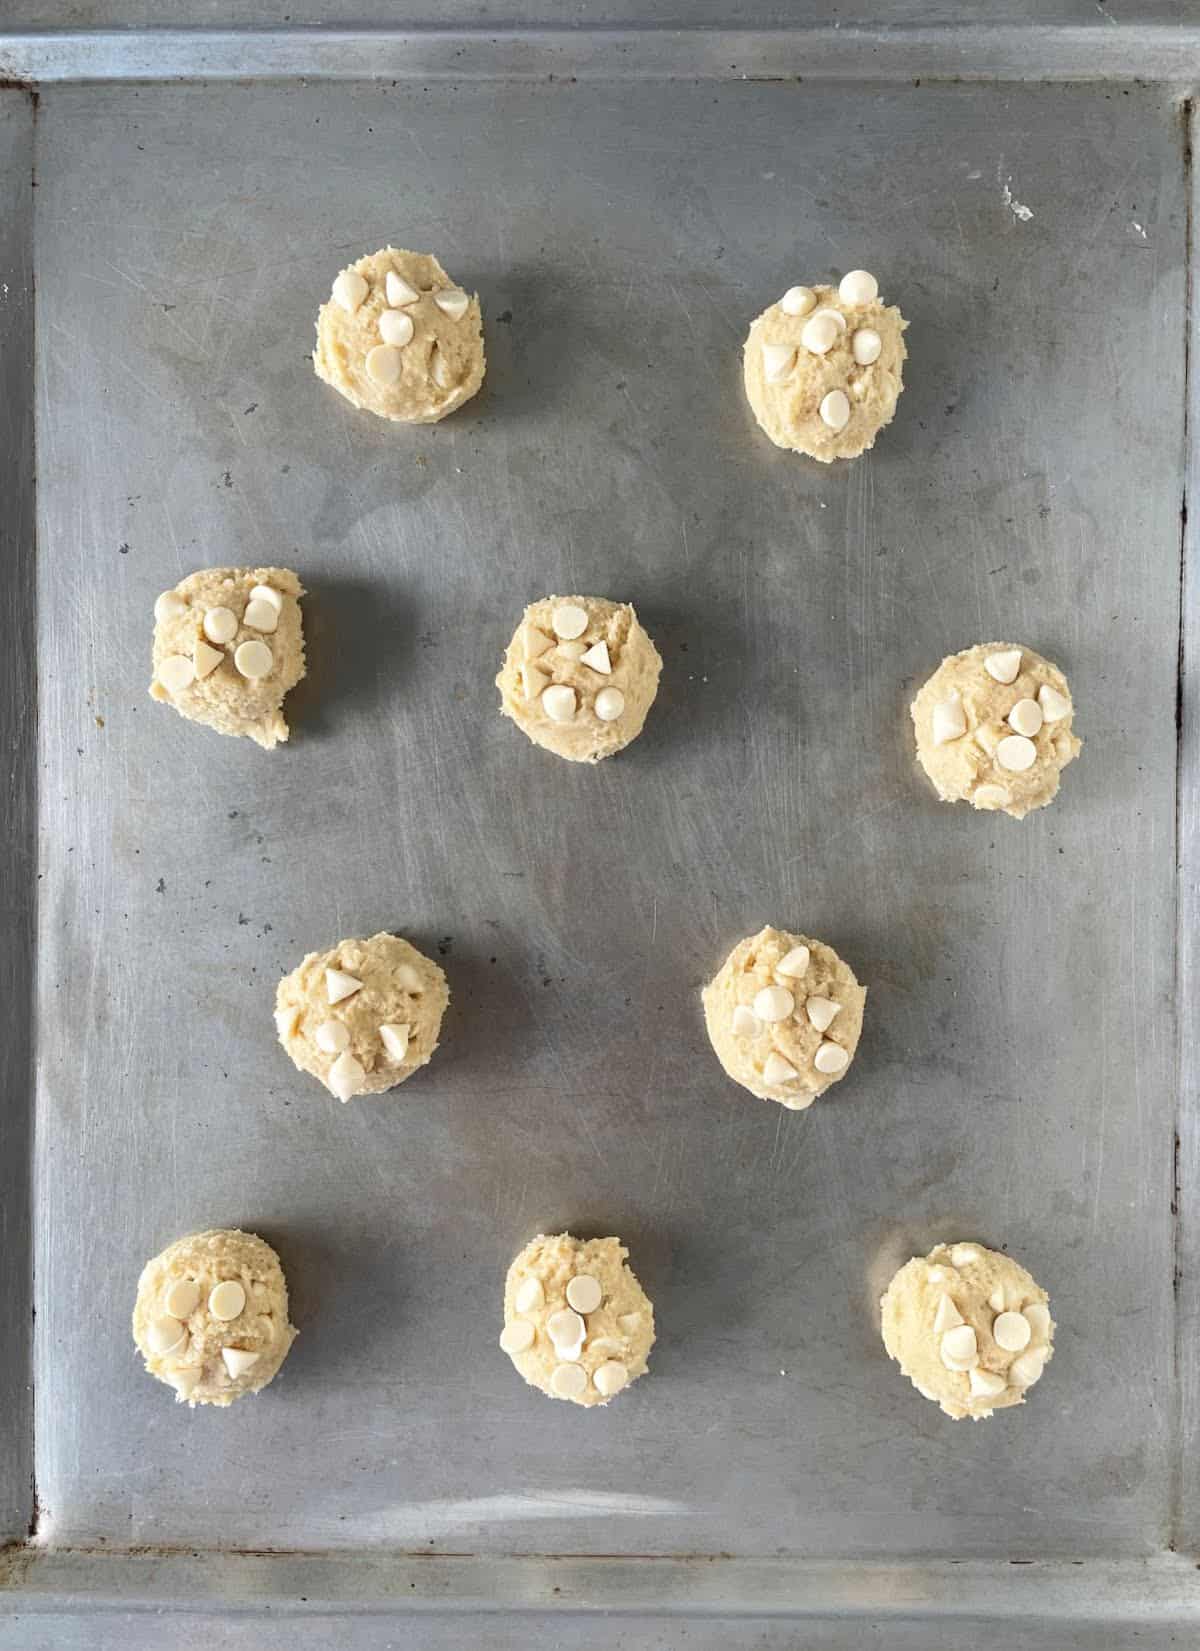 Baking metal sheet with scoops of unbaked white chocolate cookies.